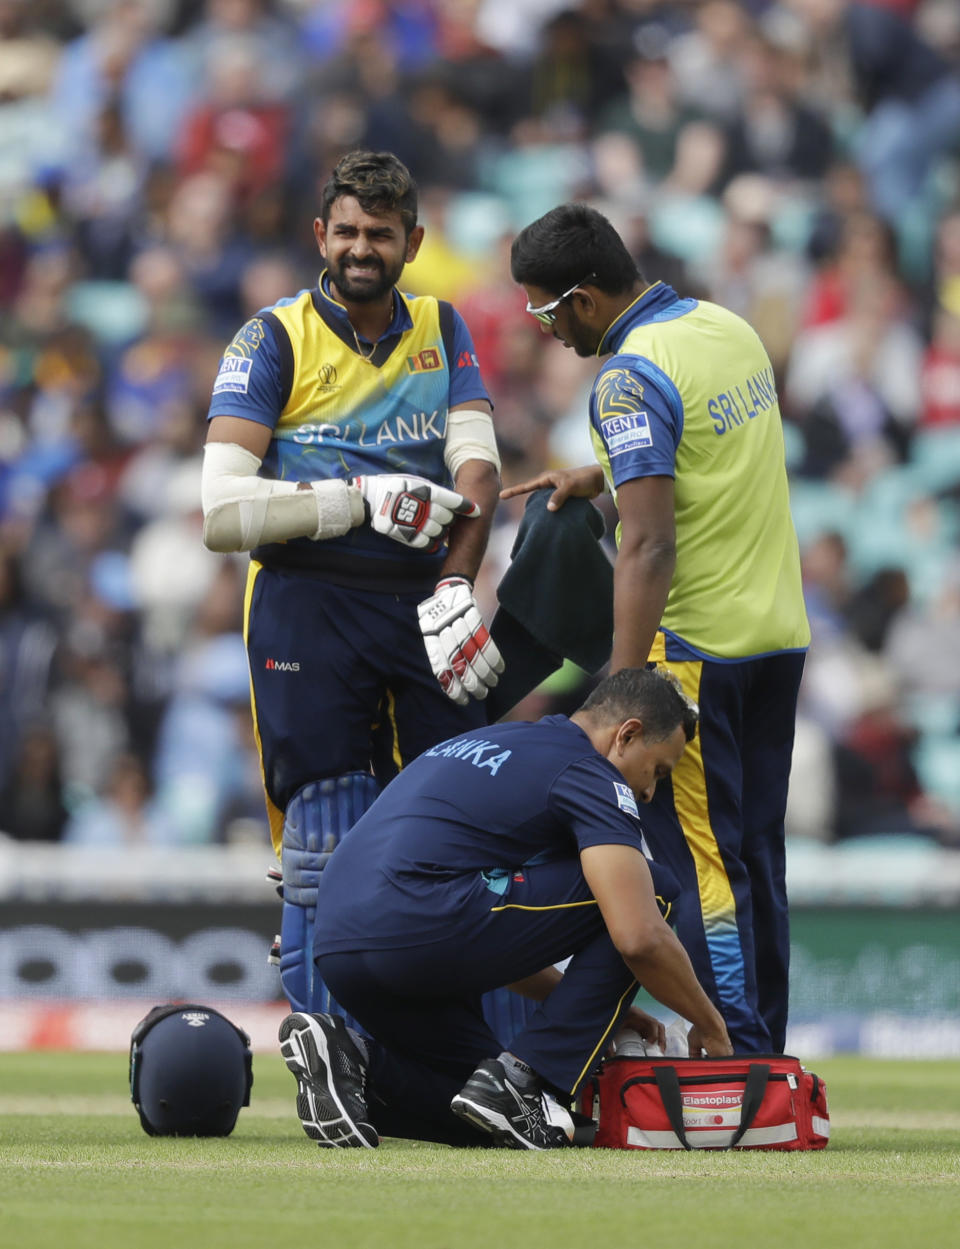 Sri Lanka's Lahiru Thirimanne holds his arm after getting hit by the ball during the World Cup cricket match between Sri Lanka and Australia at The Oval in London, Saturday, June 15, 2019. (AP Photo/Kirsty Wigglesworth)